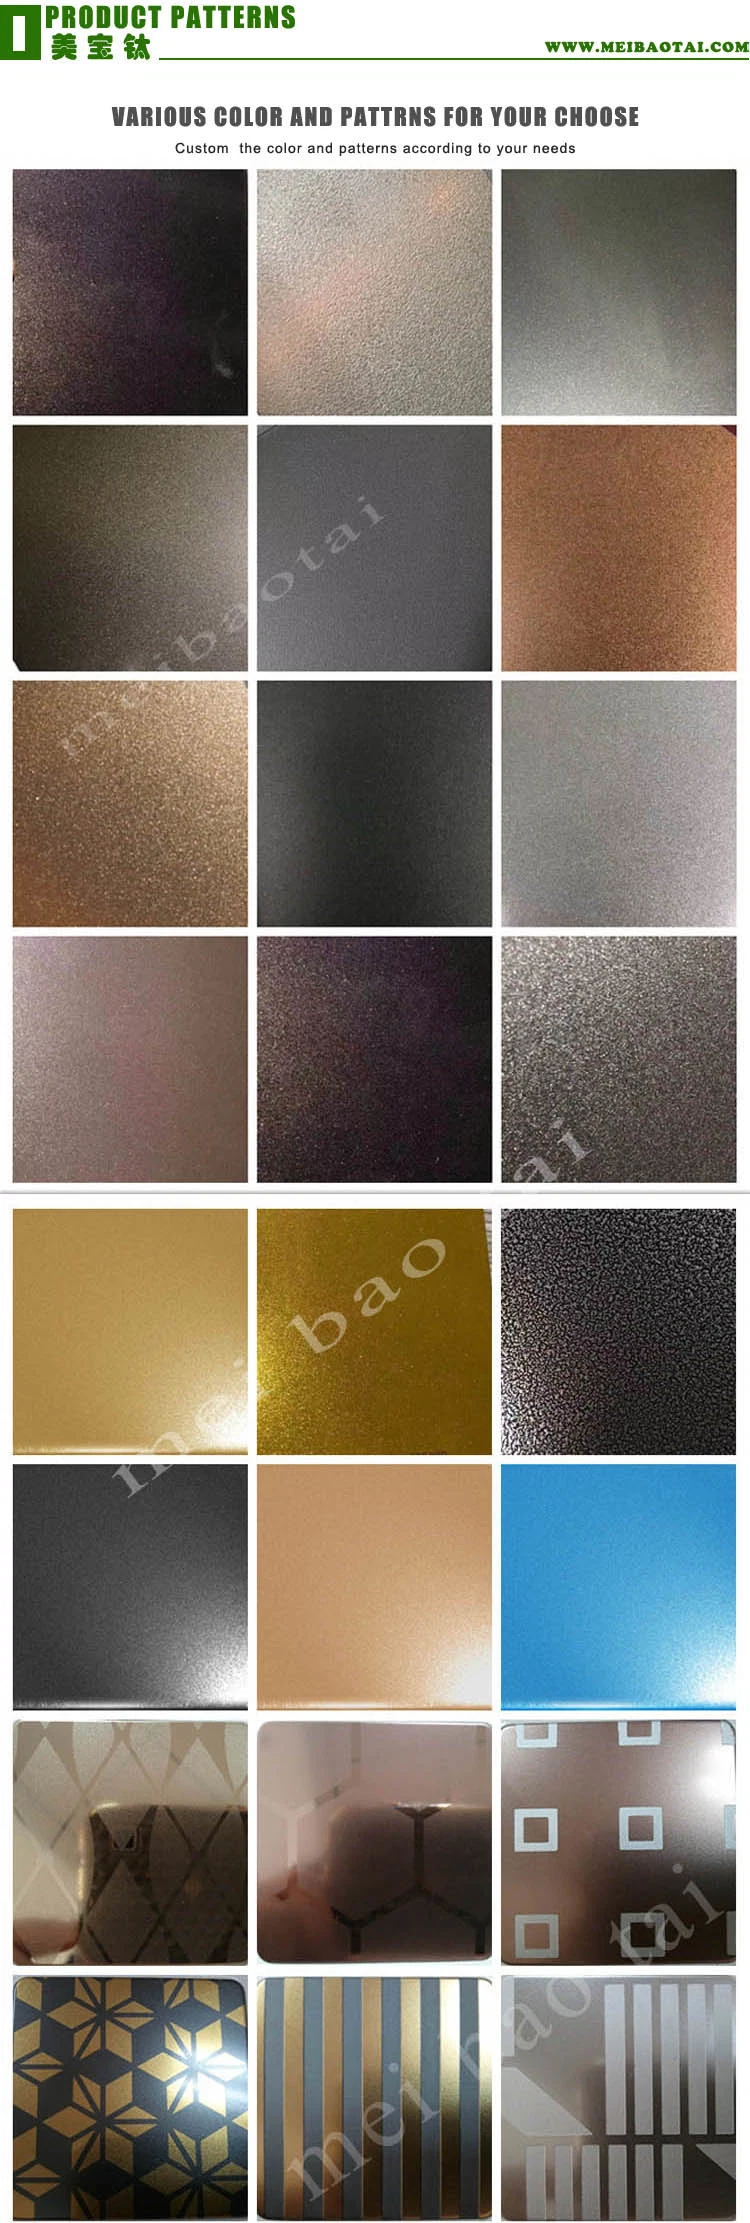 304 Bead Blast Color Decorative Stainless Steel Sheet in PVD Coated